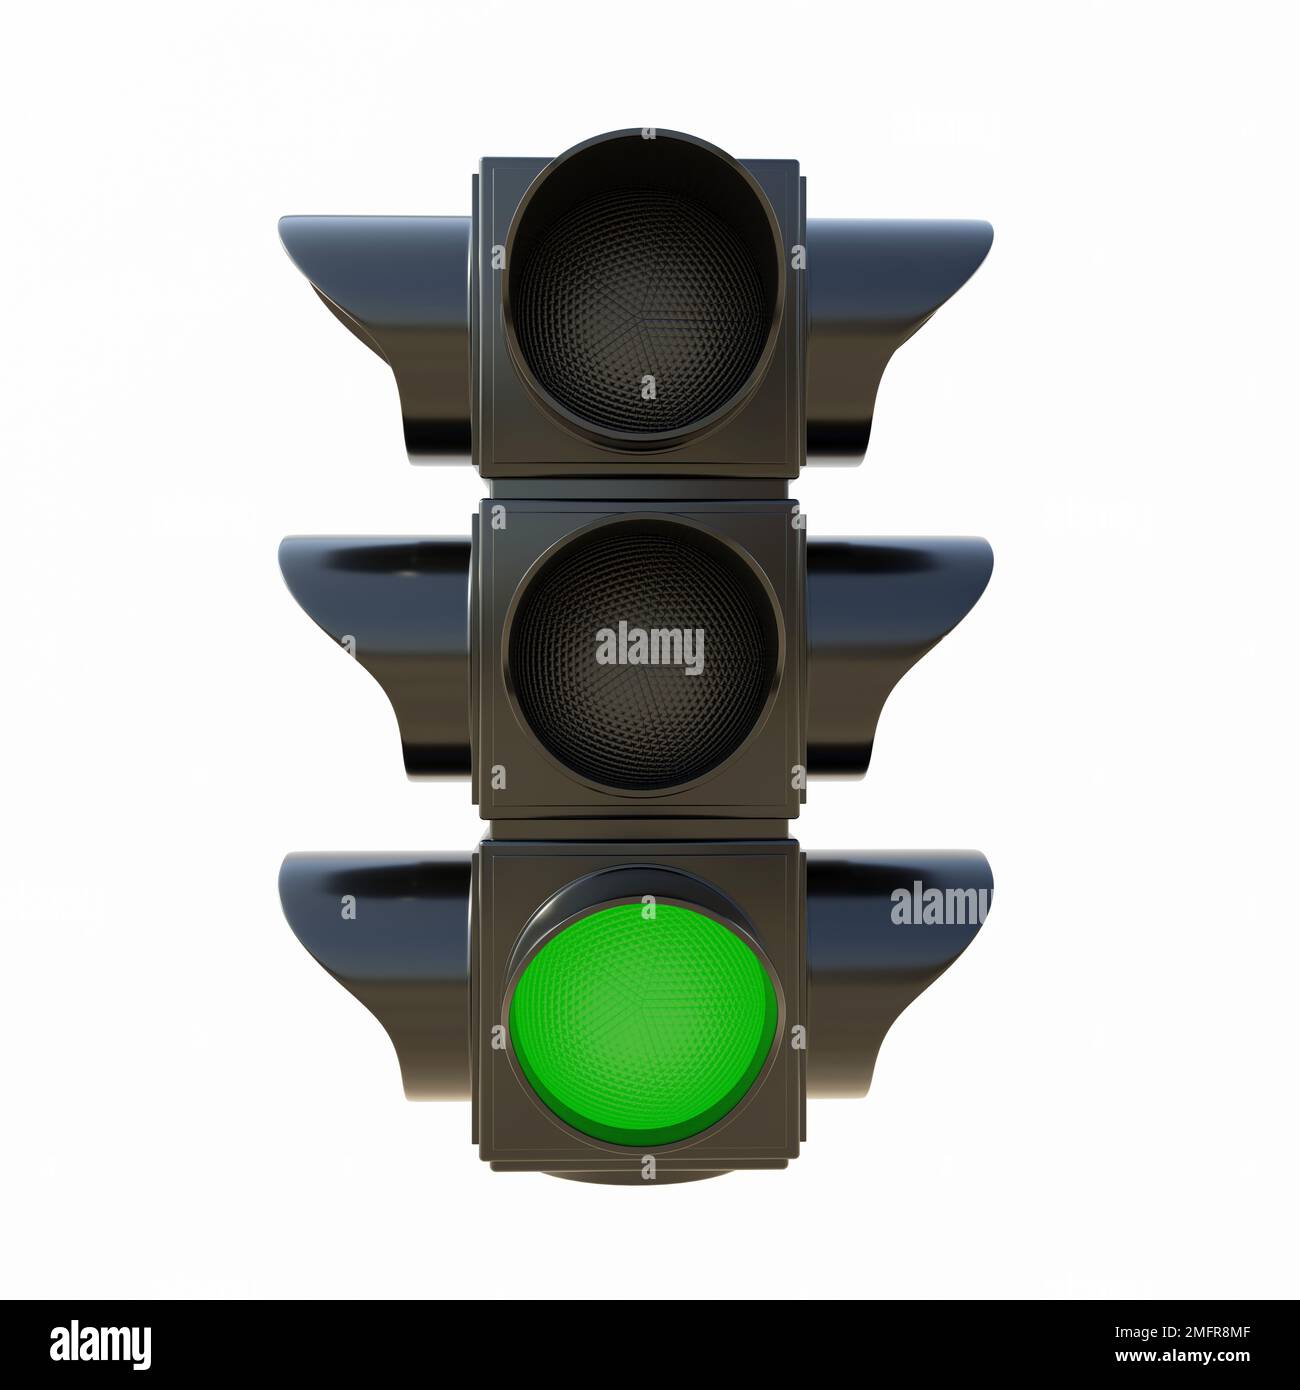 Safety travel on road concept. Traffic Light isolated cutout on white background. Semaphore with green go signal for driver, free passage. 3d render Stock Photo